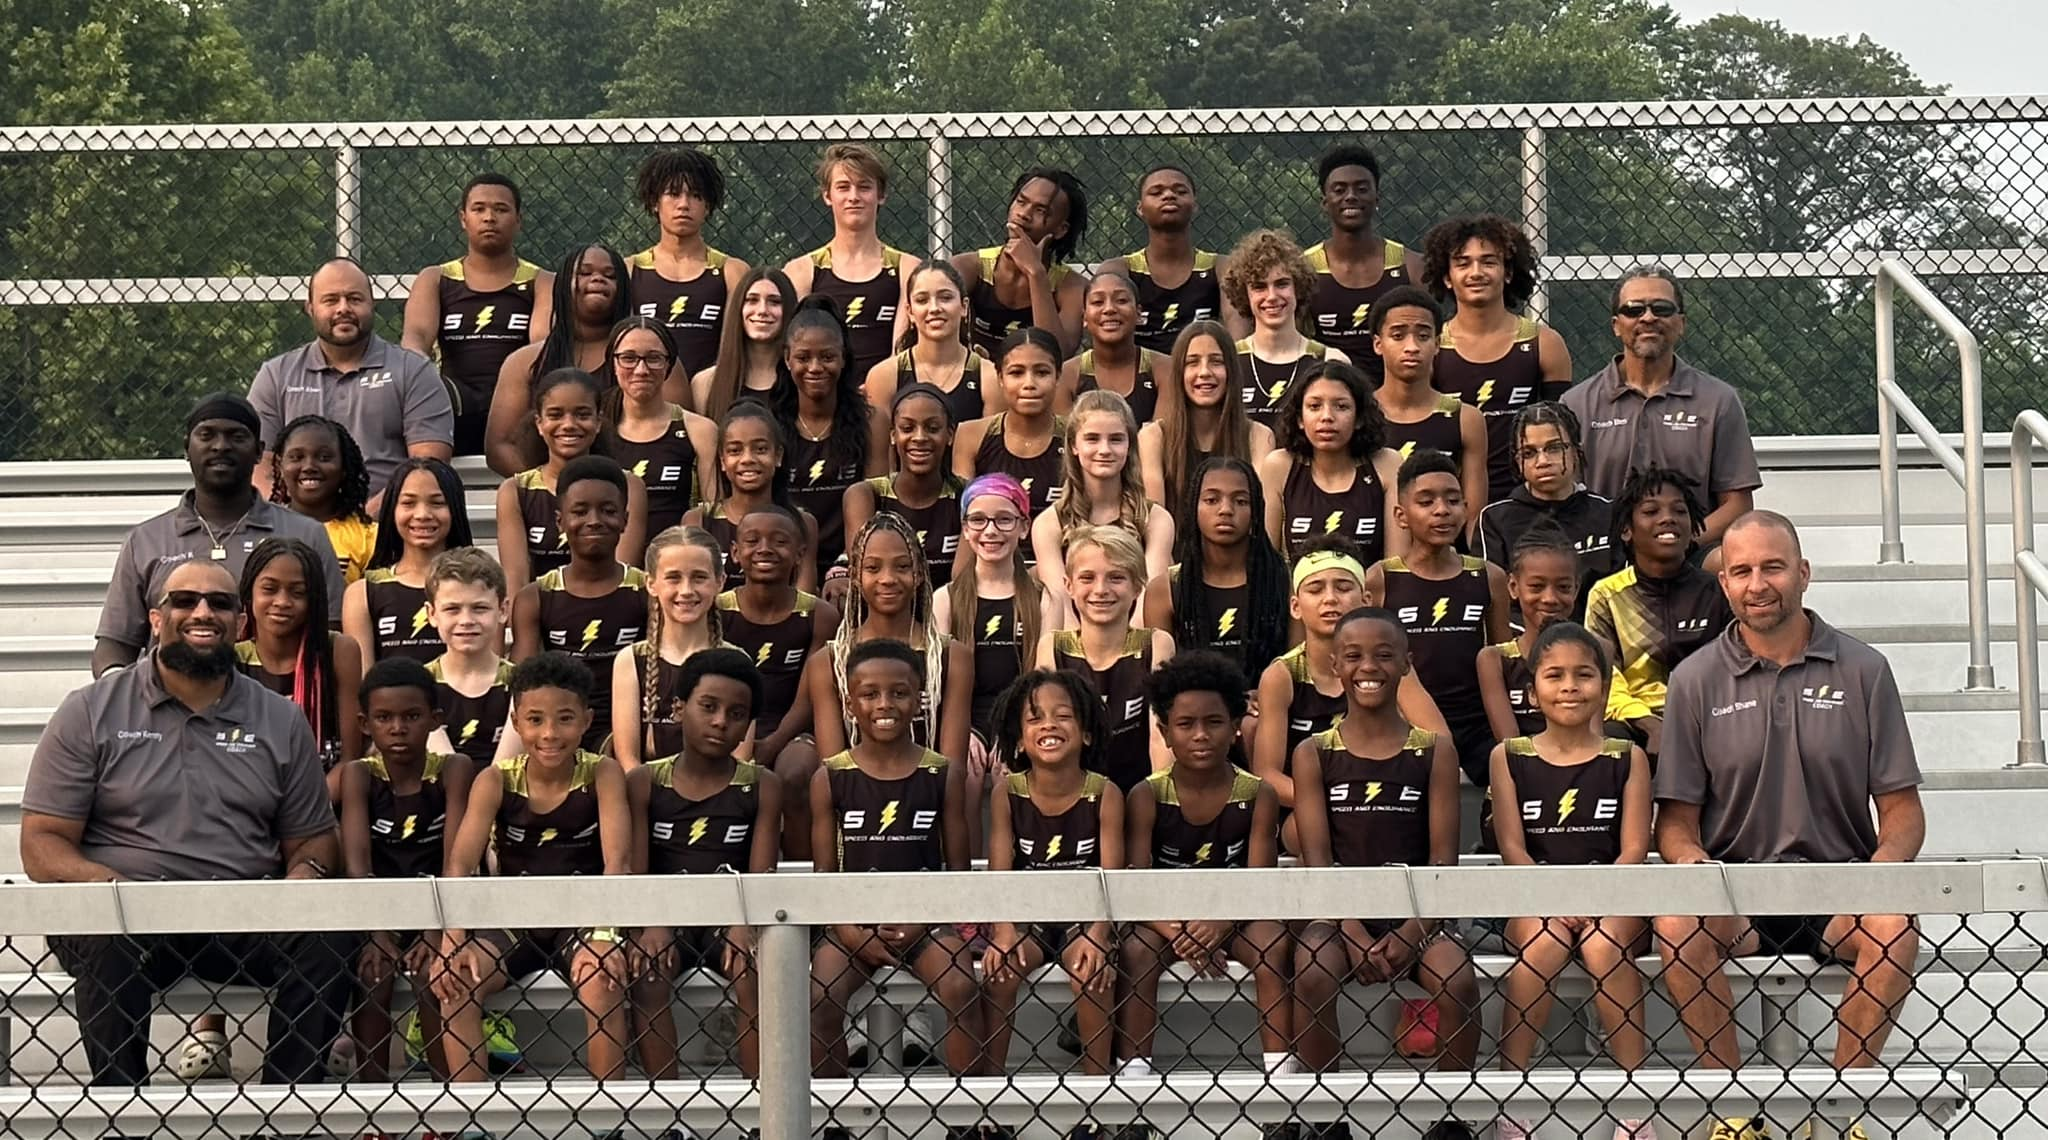 S&E Southern Maryland's Youth Track and Field Club - Speed and